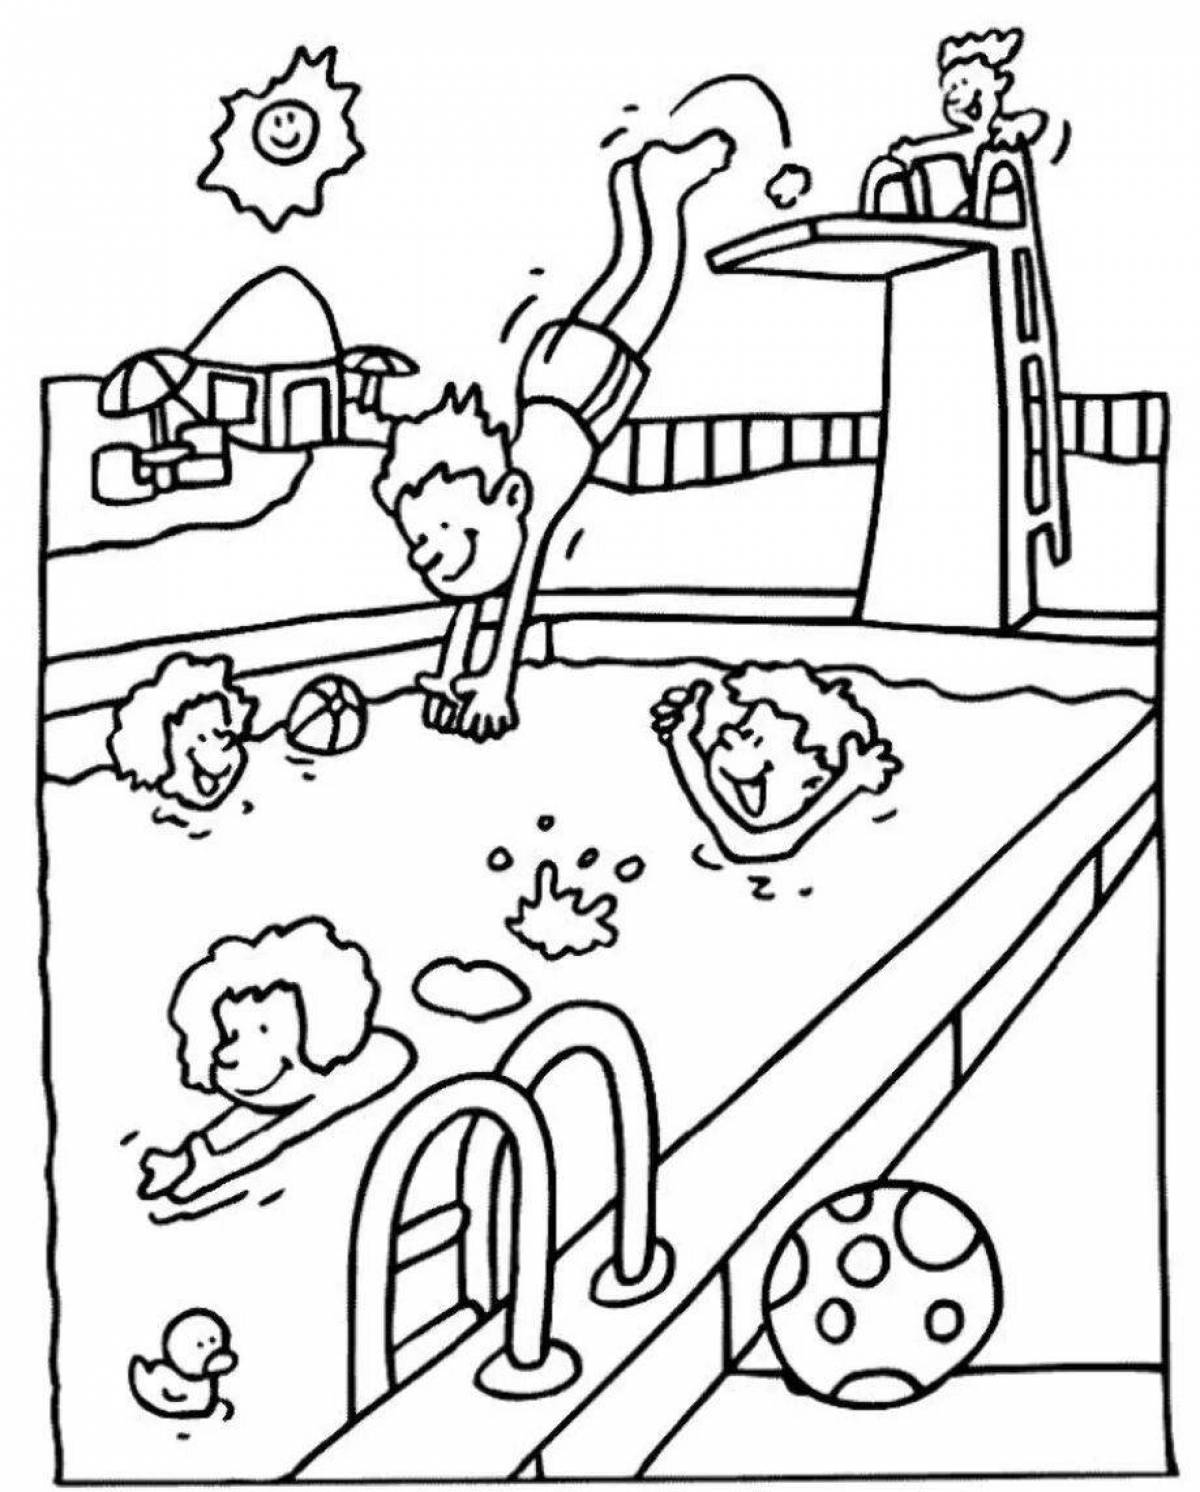 Glowing pool coloring page for kids